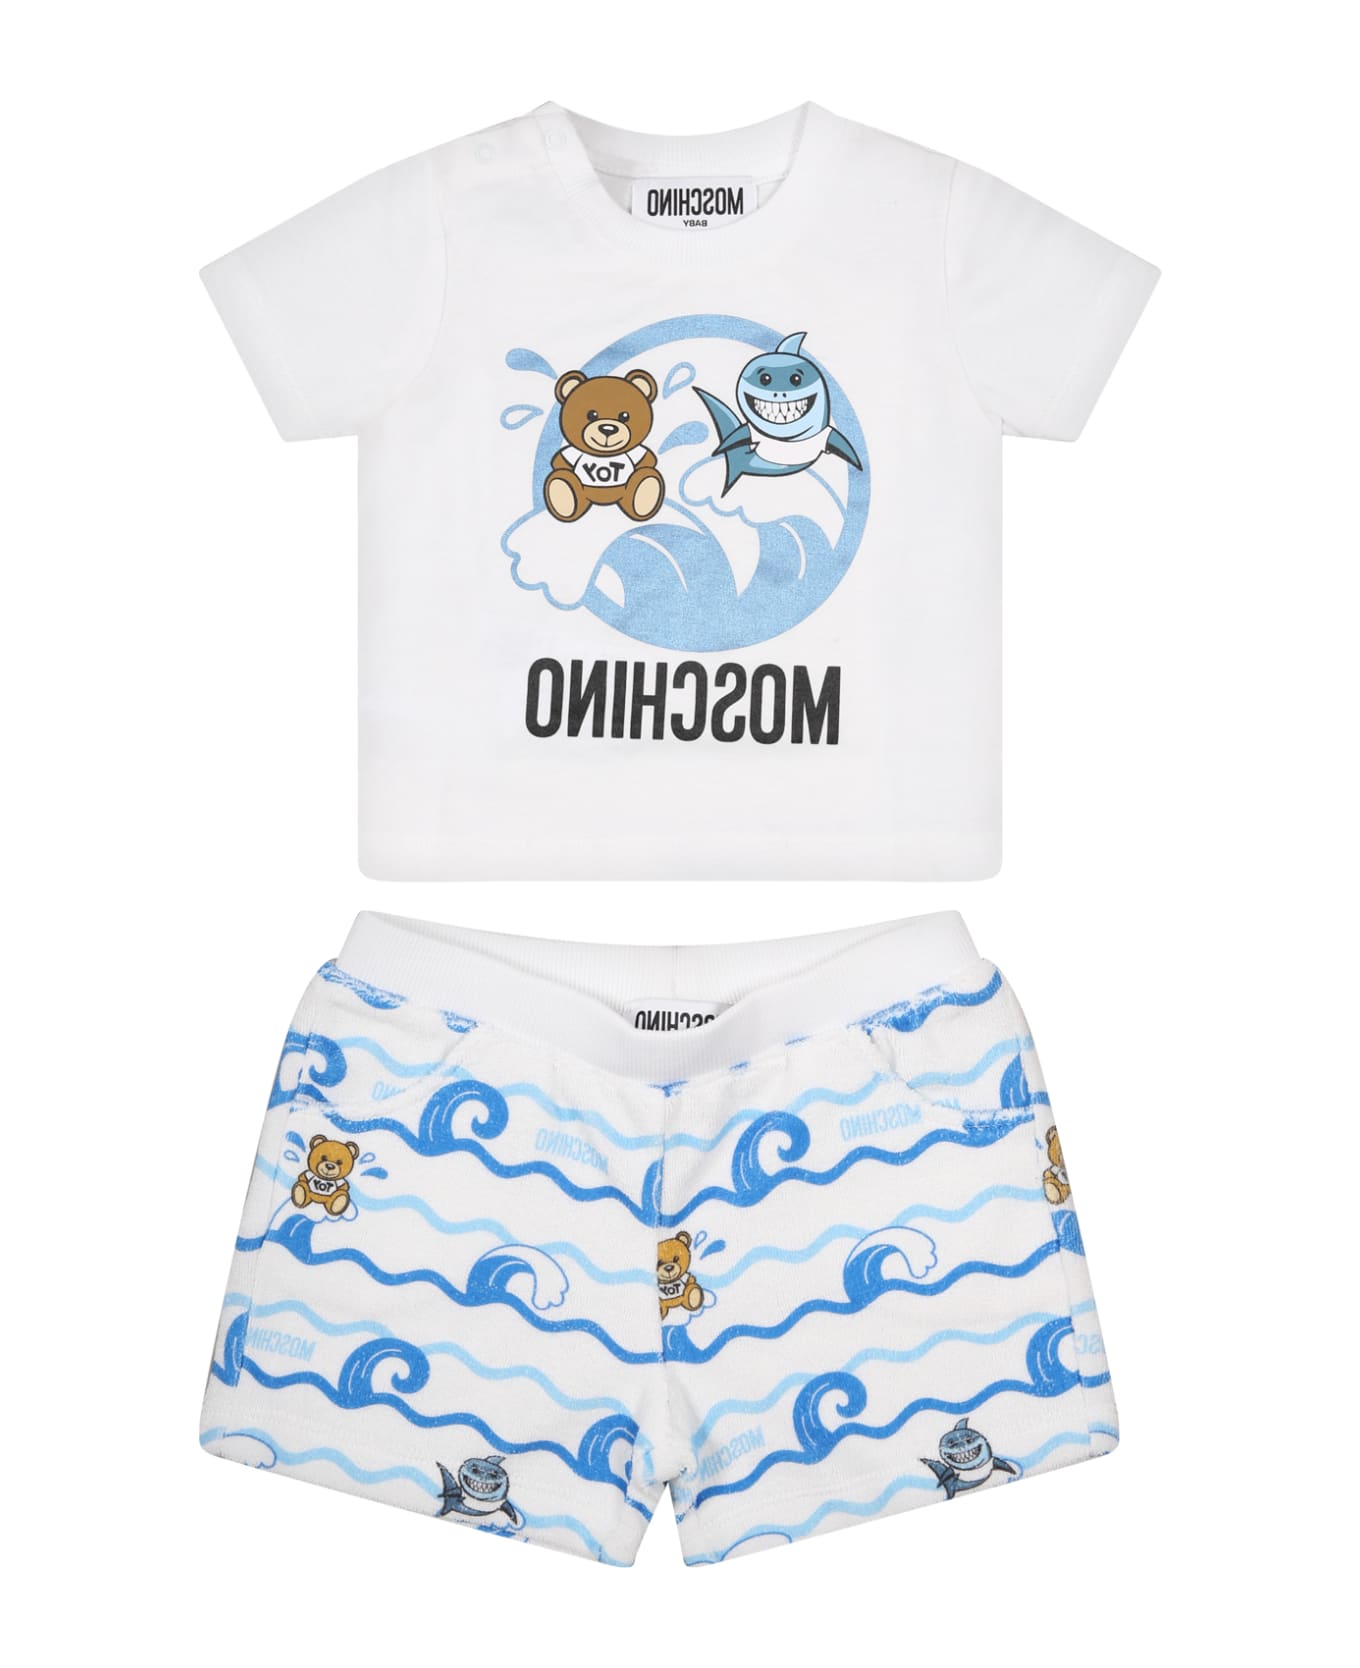 Moschino White Outfit For Baby Boy With Teddy Bear, Logo And Print - White